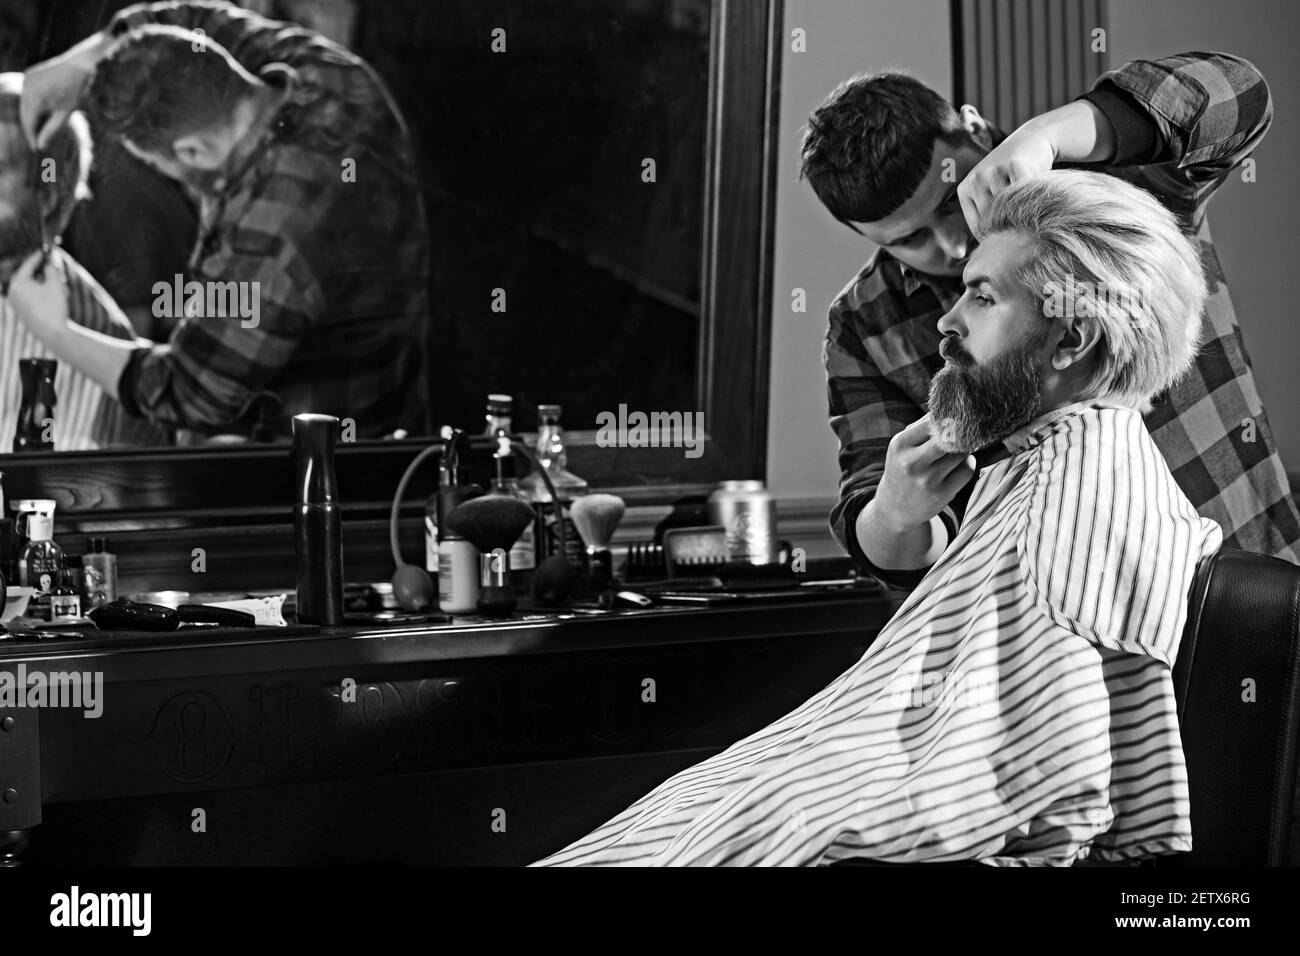 Barbershop. The client in the master s chair in the barbershop. Stock Photo